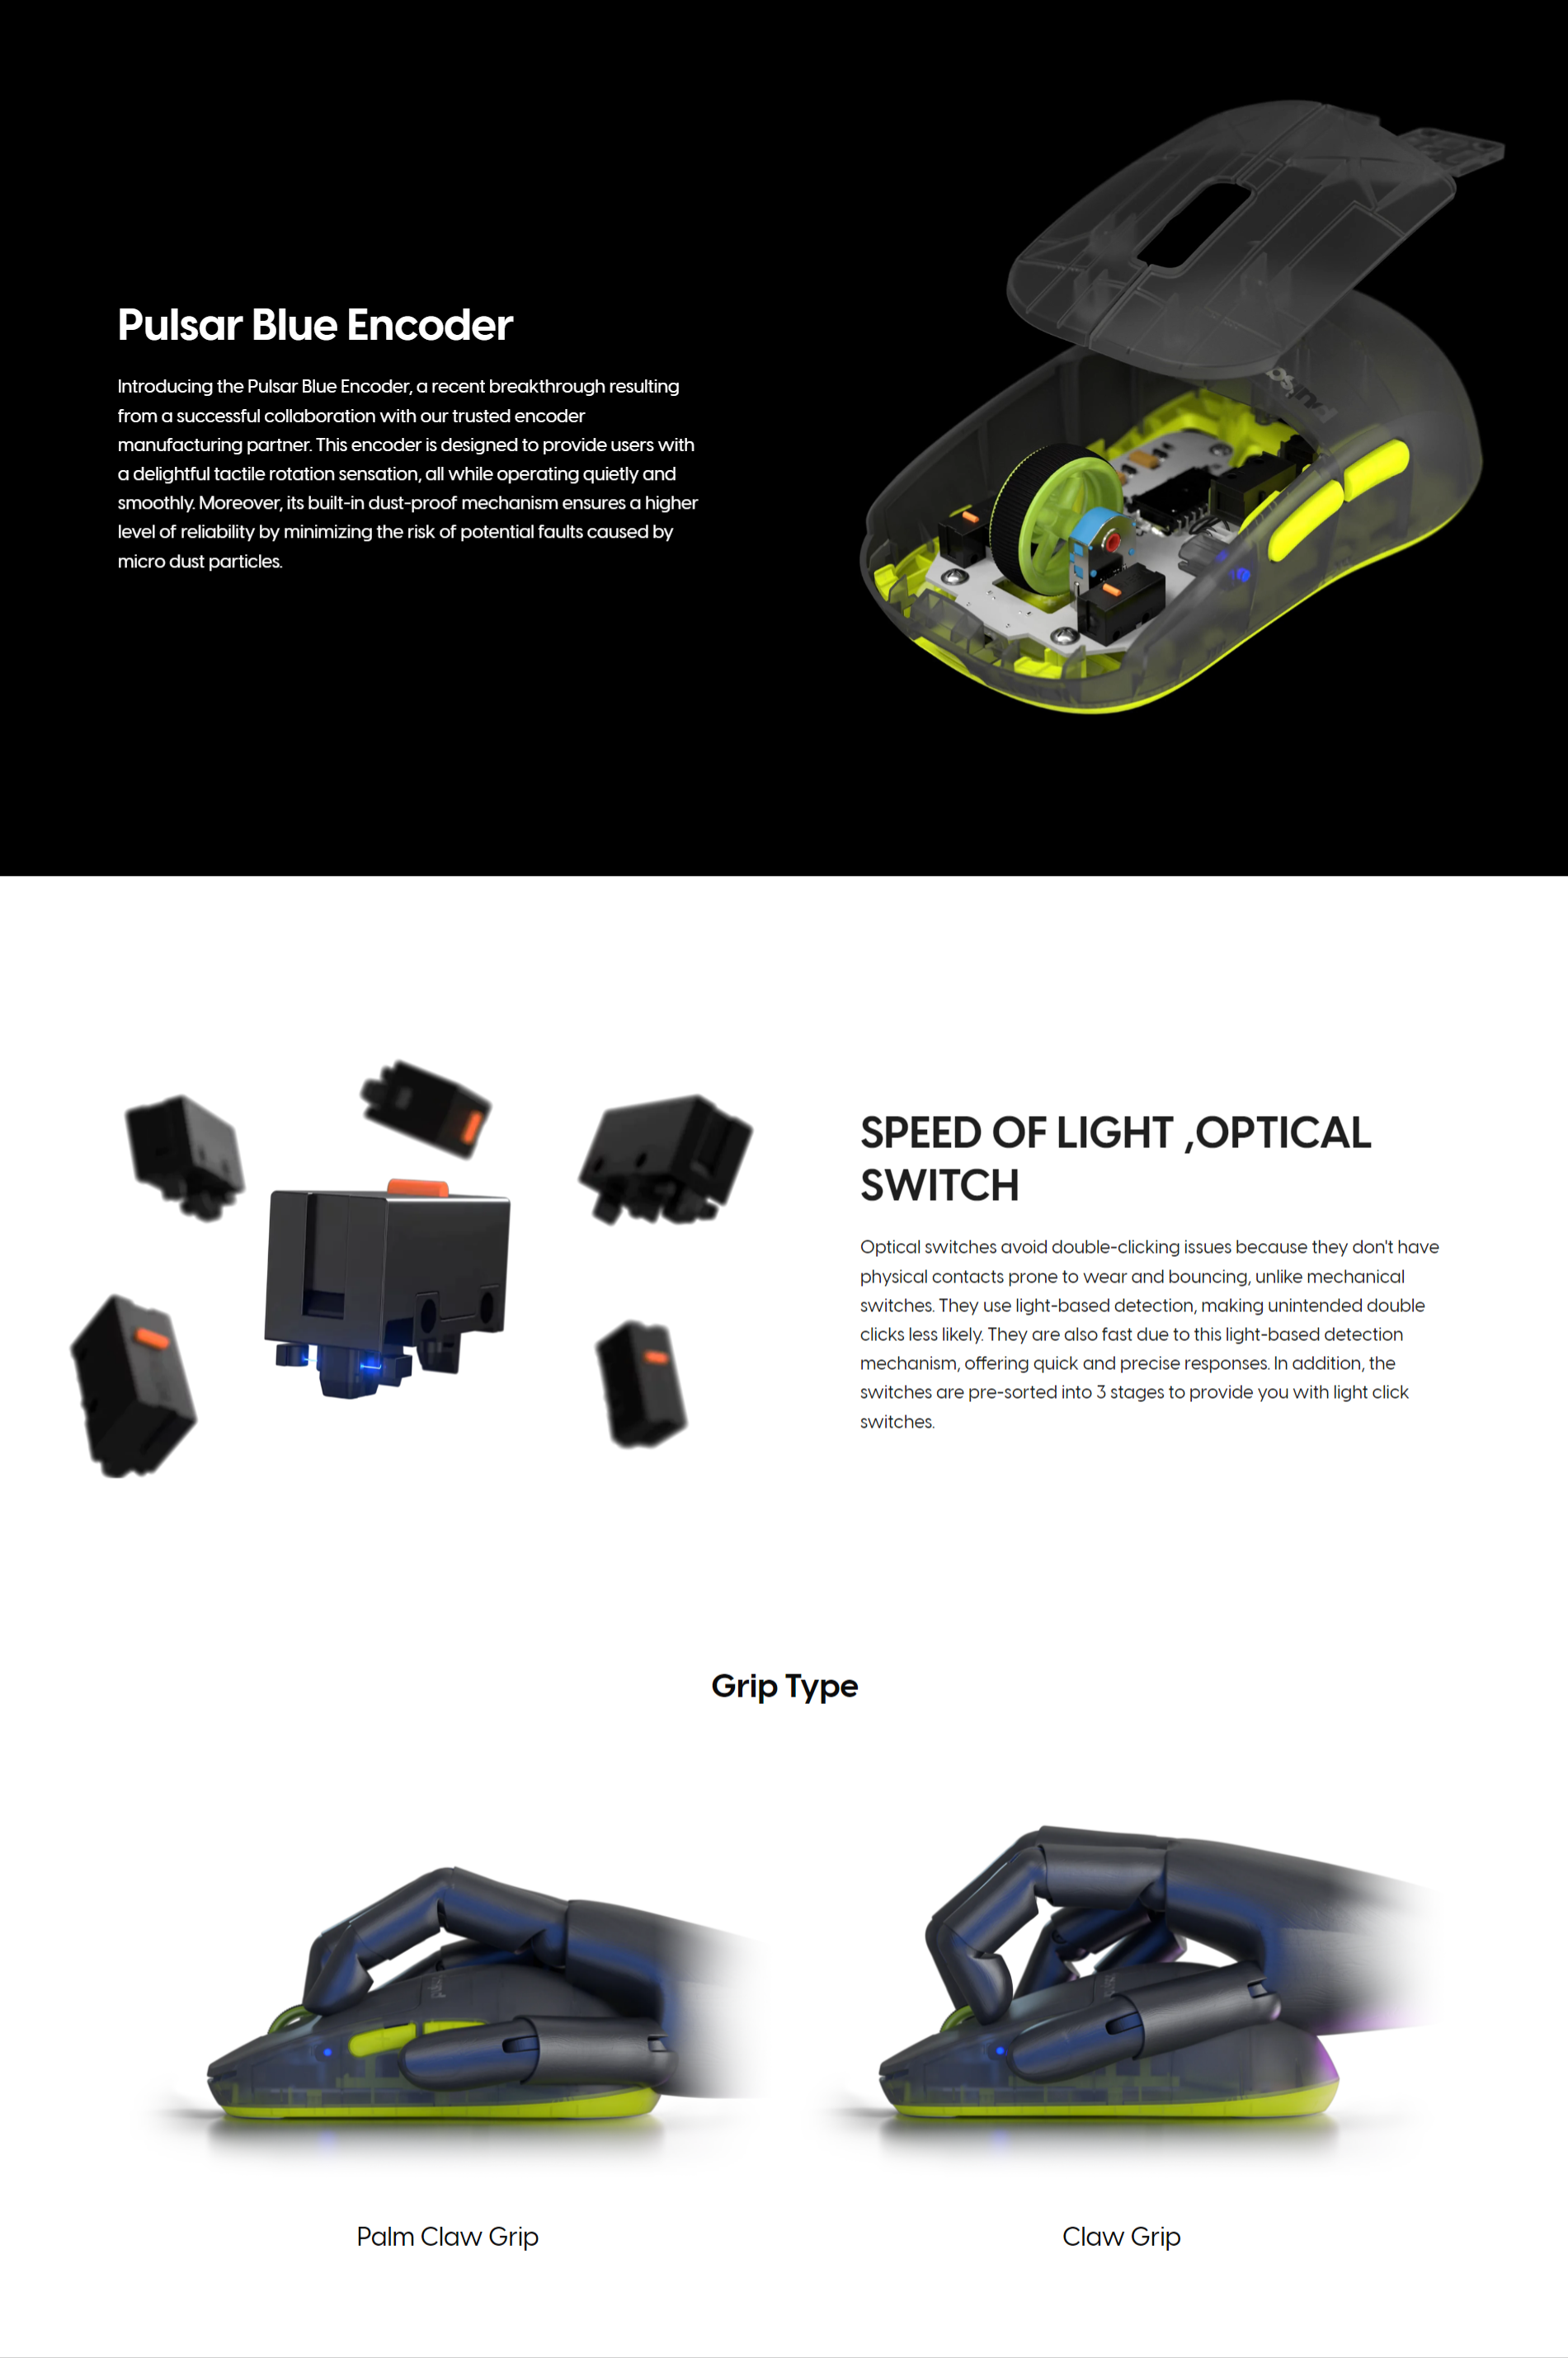 A large marketing image providing additional information about the product Pulsar X2H Wireless Gaming Mouse Limited Edition - Acid Rewind Edition - Additional alt info not provided